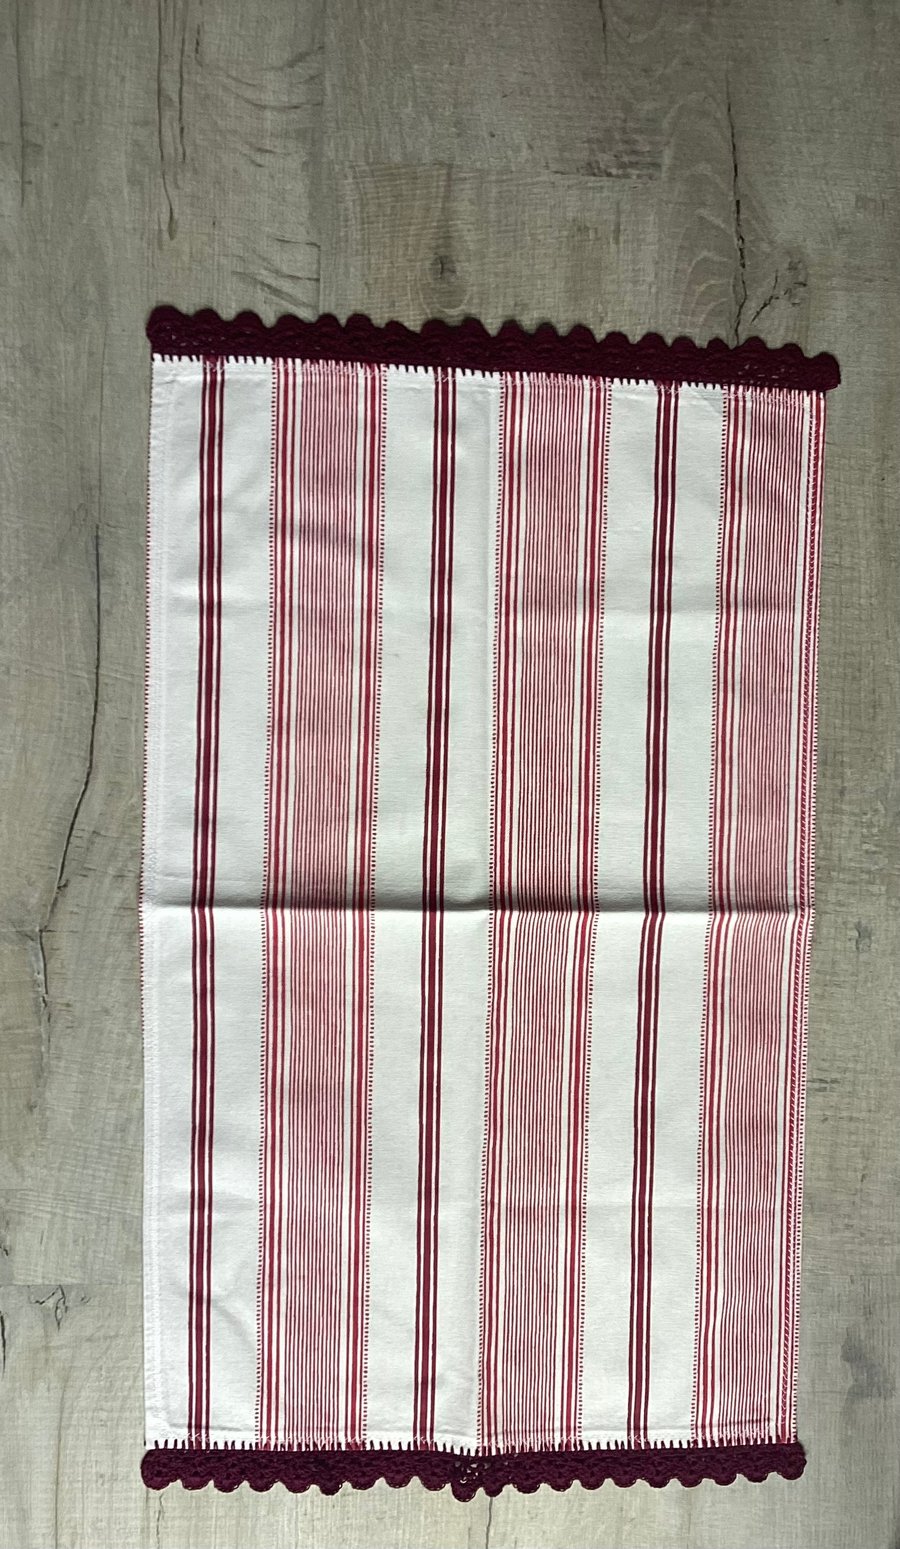 Large Tea Towel from Heacham Stripe Cranberry cotton fabric with crochet borders